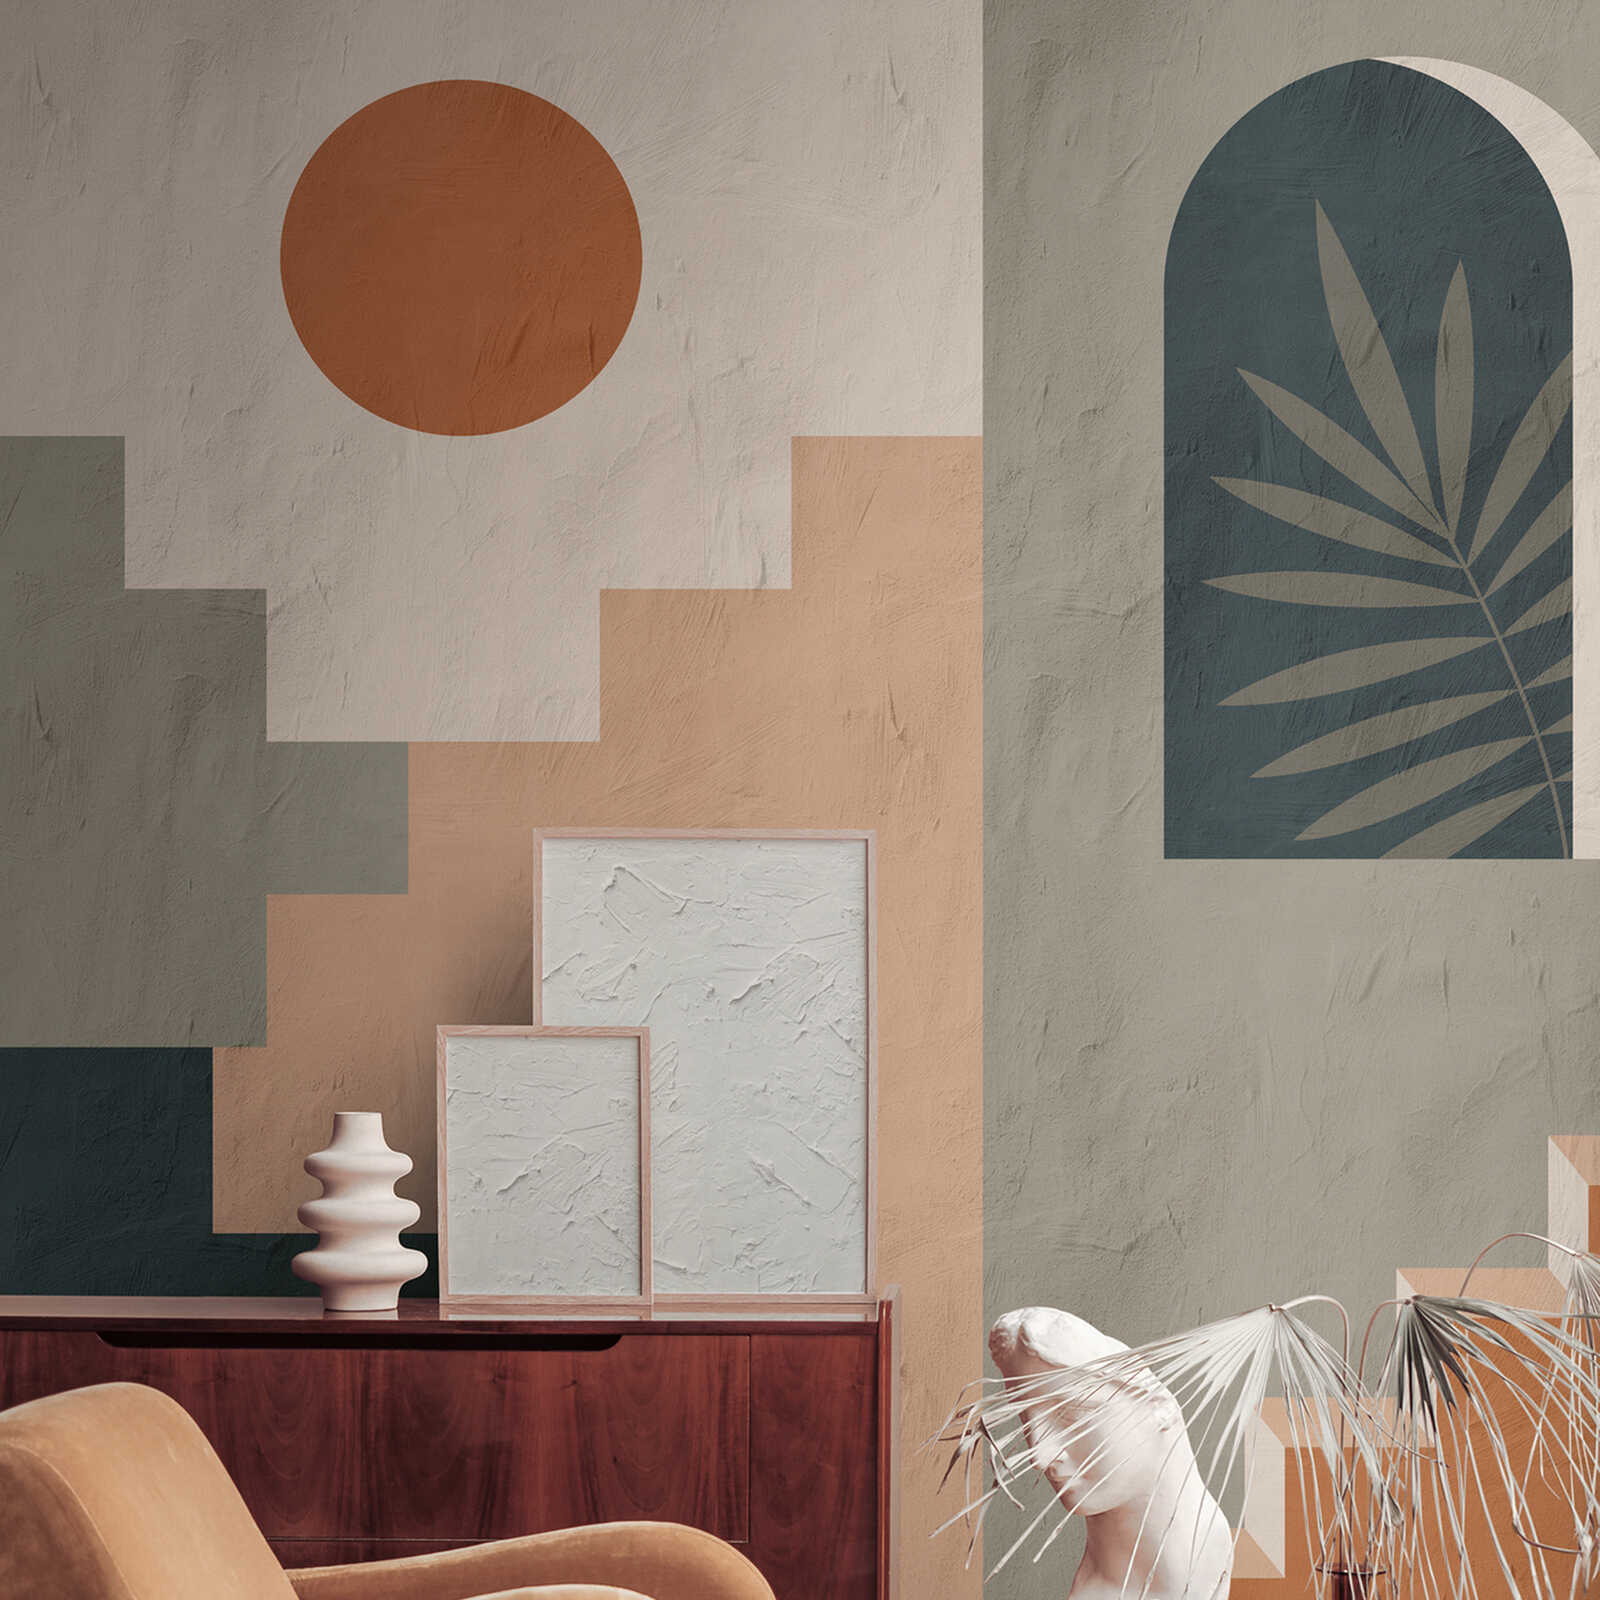         Mediterranean photo wallpaper with abstract architecture in warm earth tones as non-woven wallpaper - green, blue, orange
    